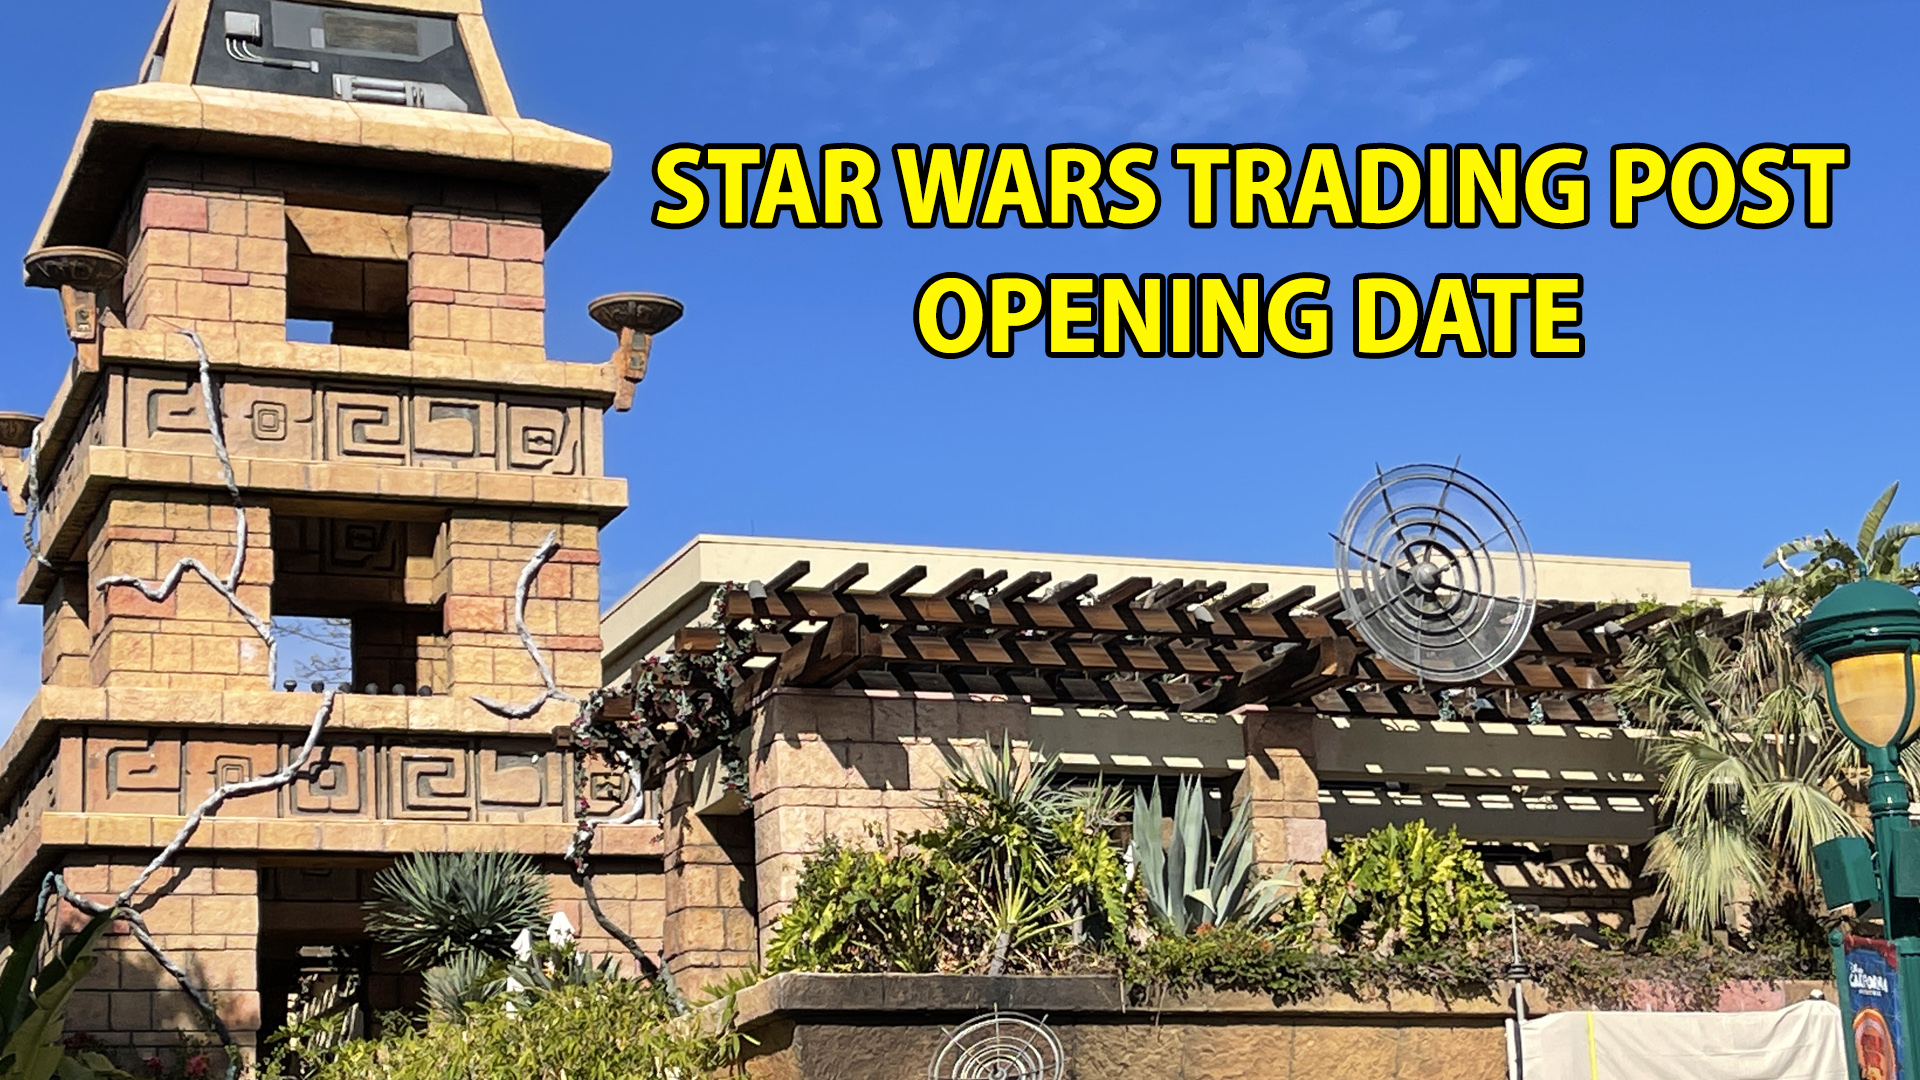 Downtown Disney Announces Opening Date for New Star Wars Trading Post Location and Preview for Legacy Passholders